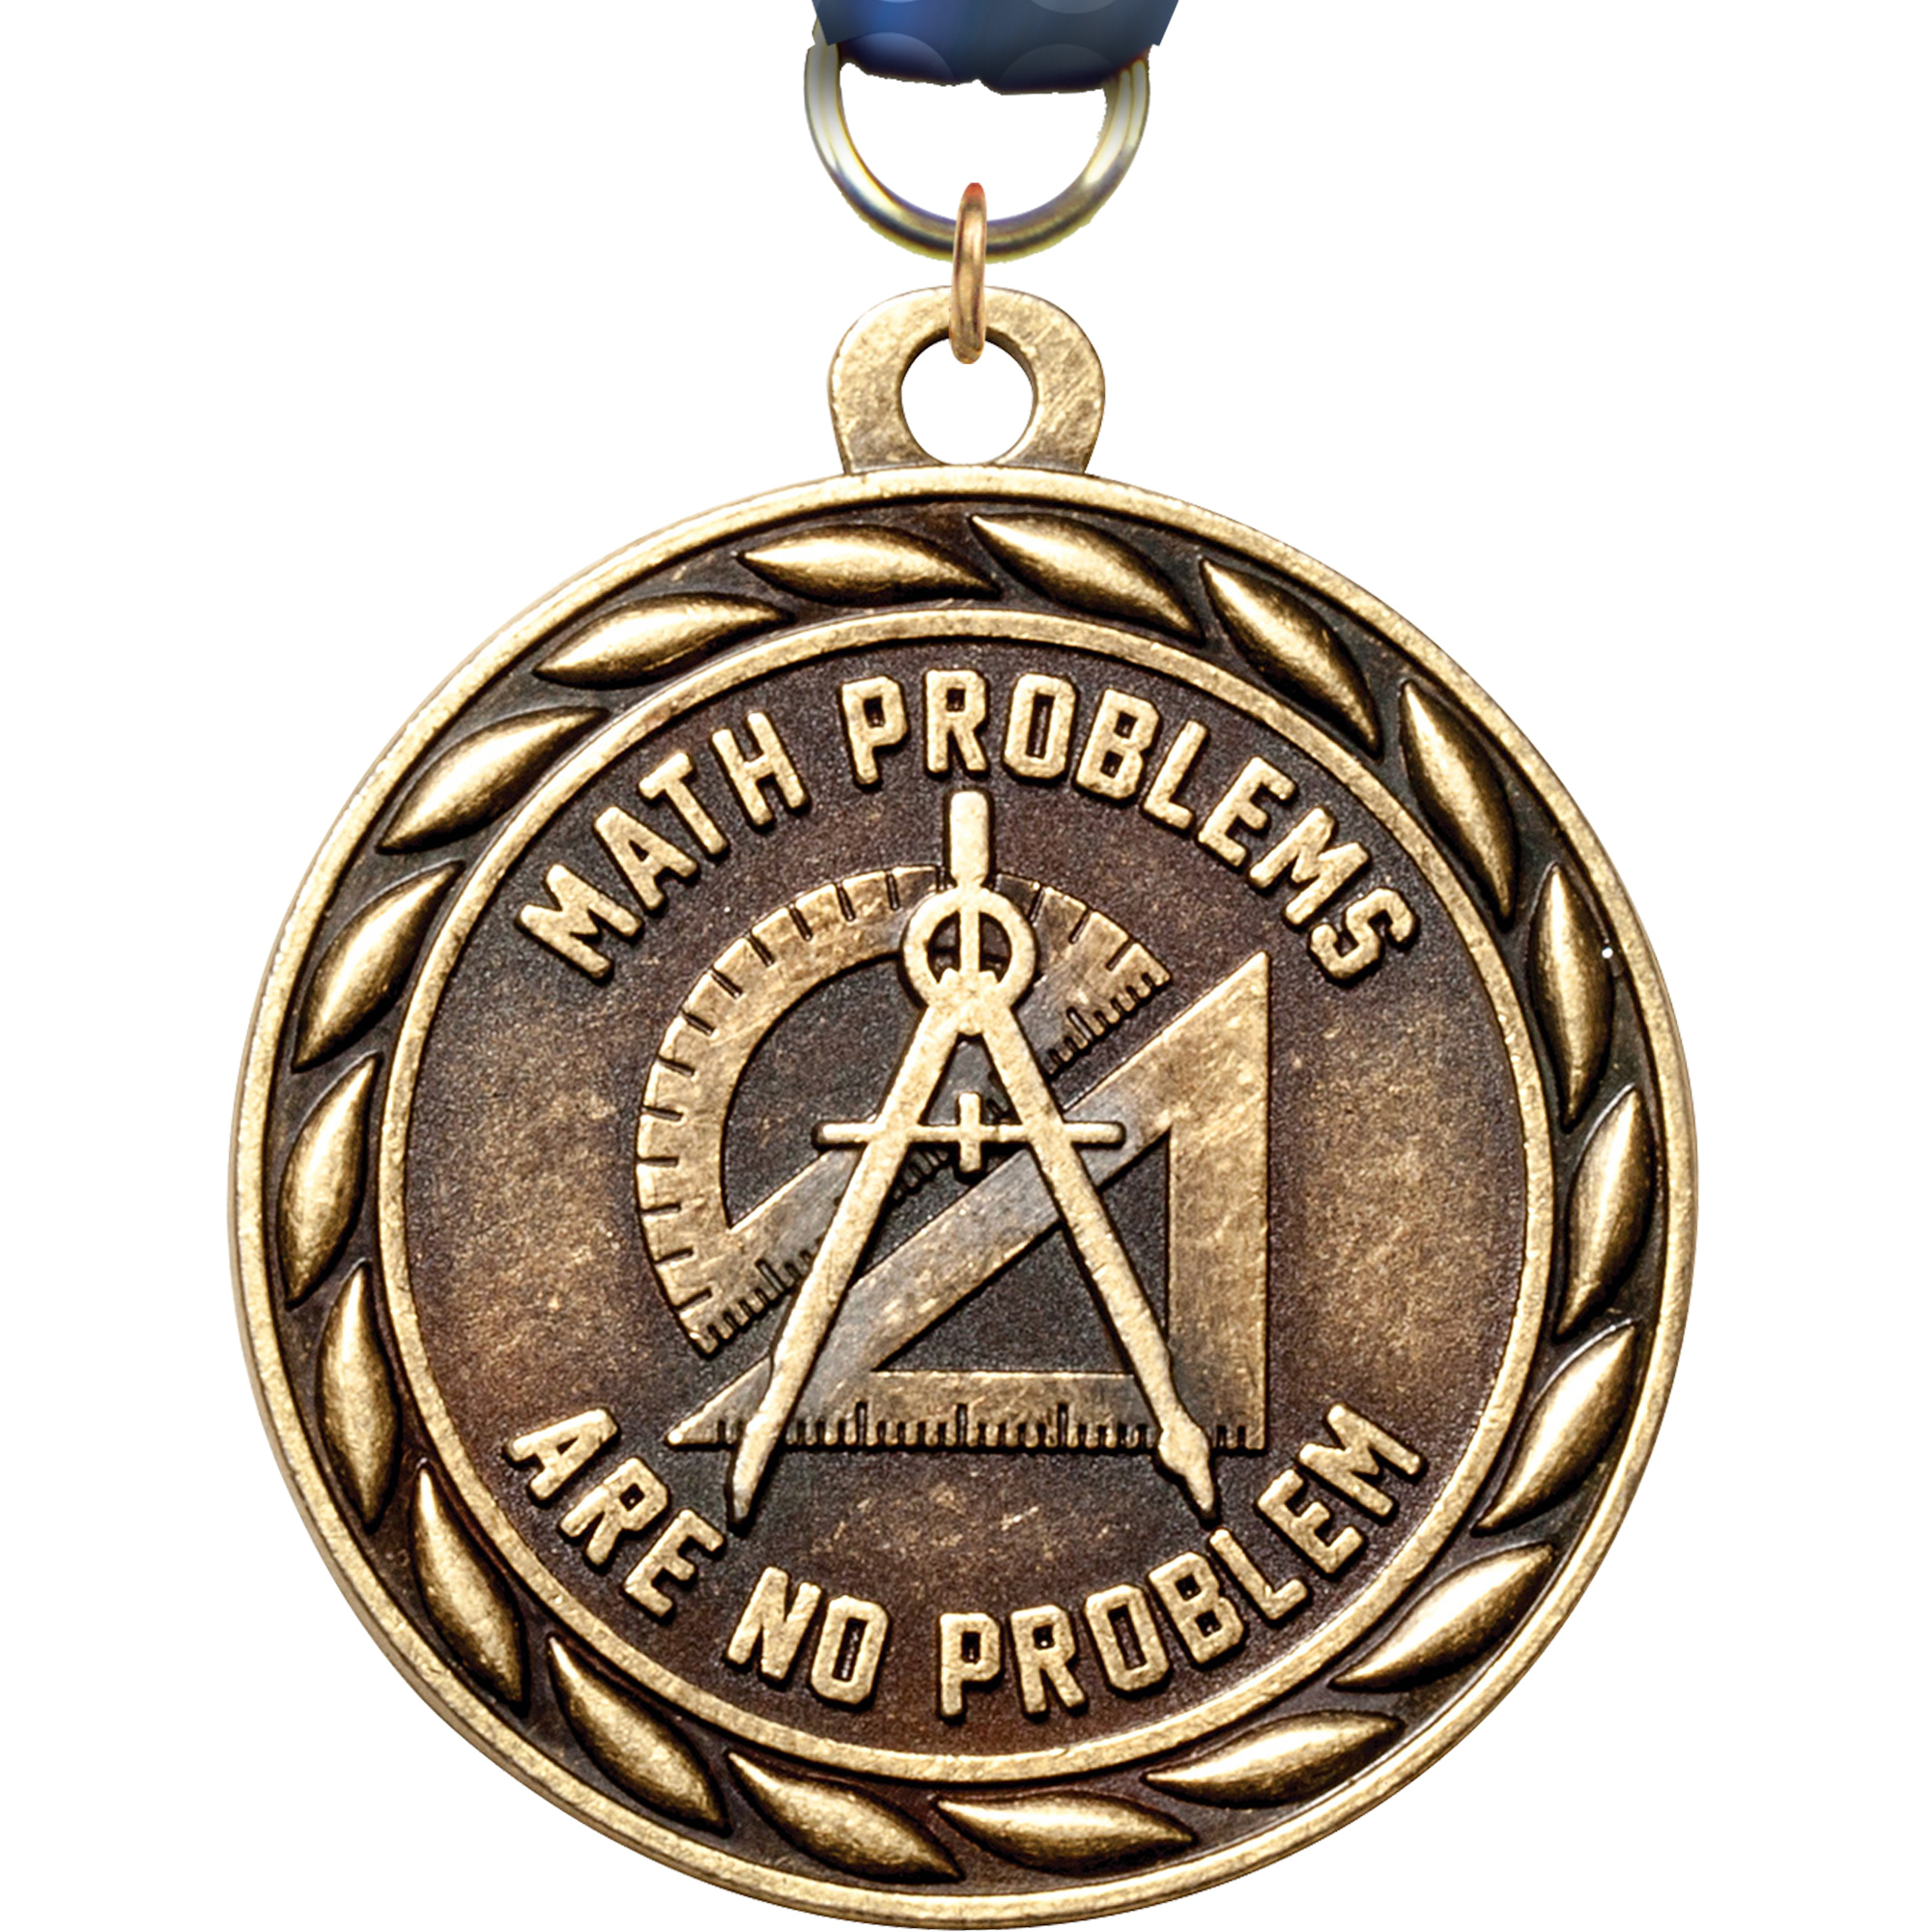 Math Problems Are No Problem Scholastic Medal- Gold